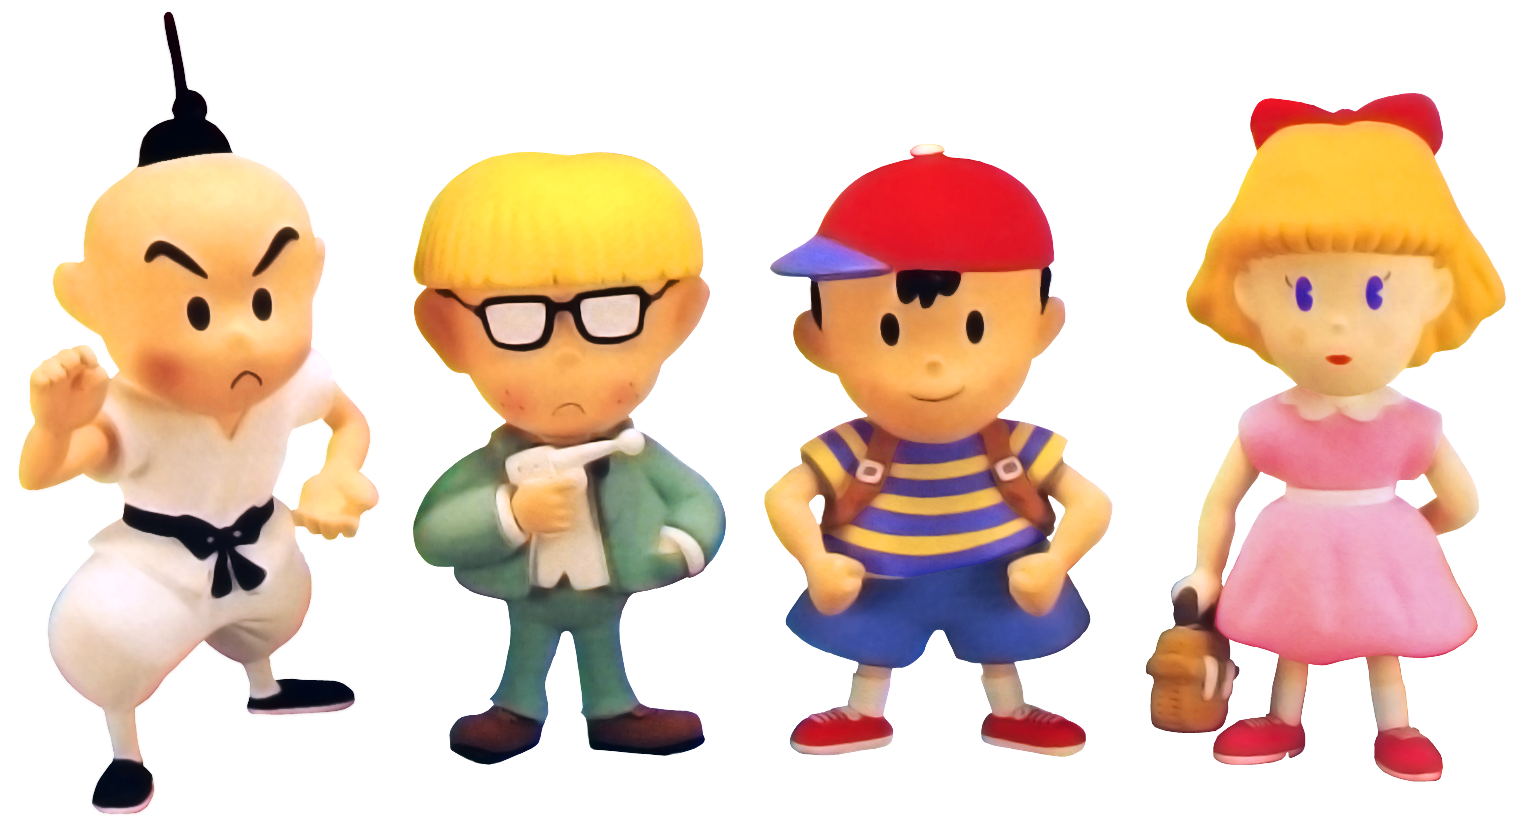 Earthbound's four lead characters against a white backdrop: Poo, Jeff, Ness, and Paula